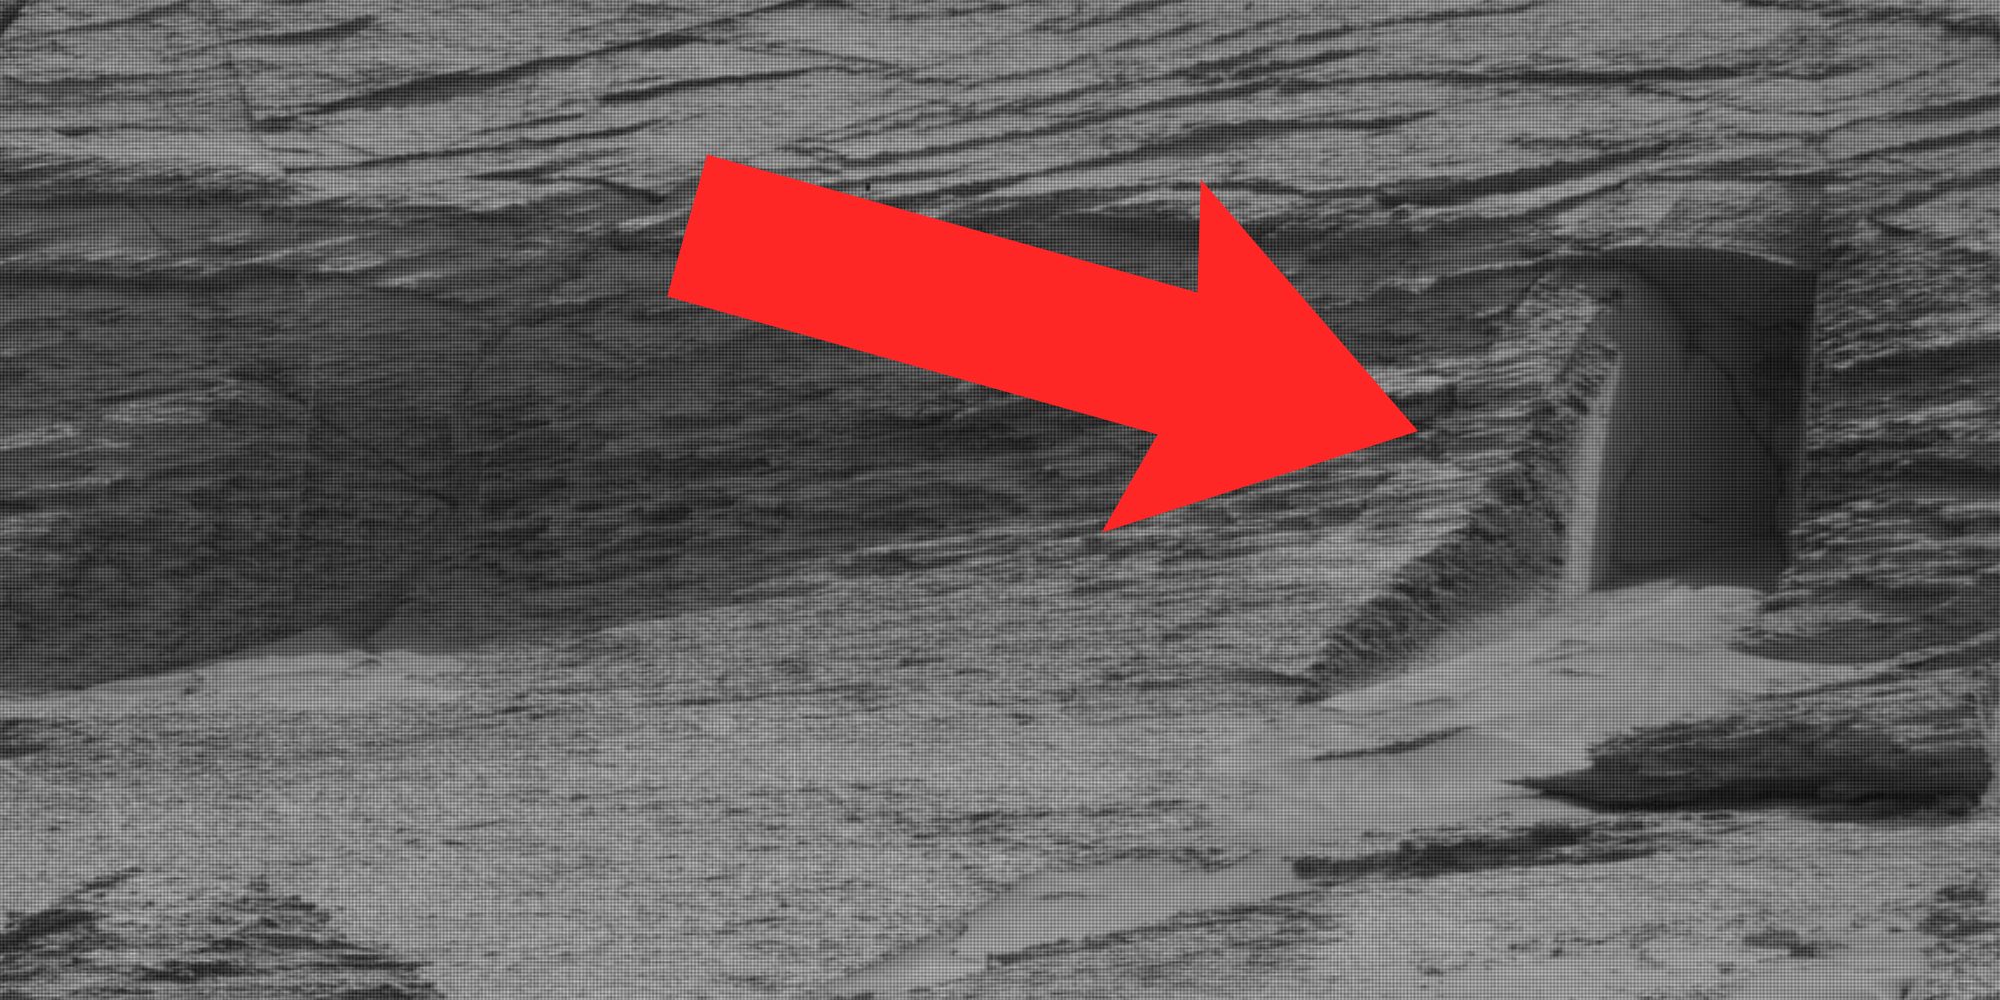 A 'doorway' on Mars, spotted by the Curiosity rover